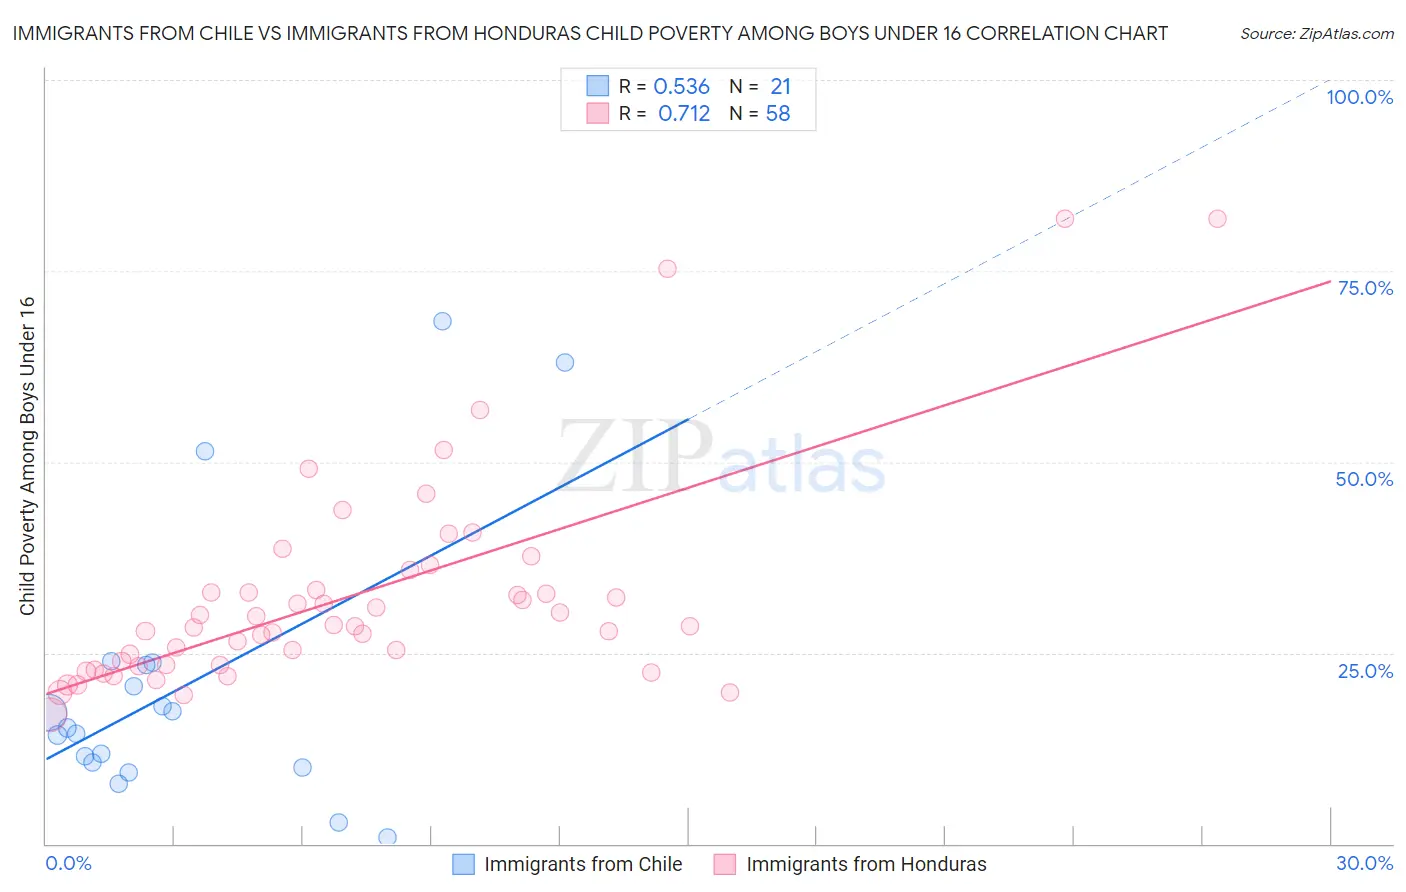 Immigrants from Chile vs Immigrants from Honduras Child Poverty Among Boys Under 16